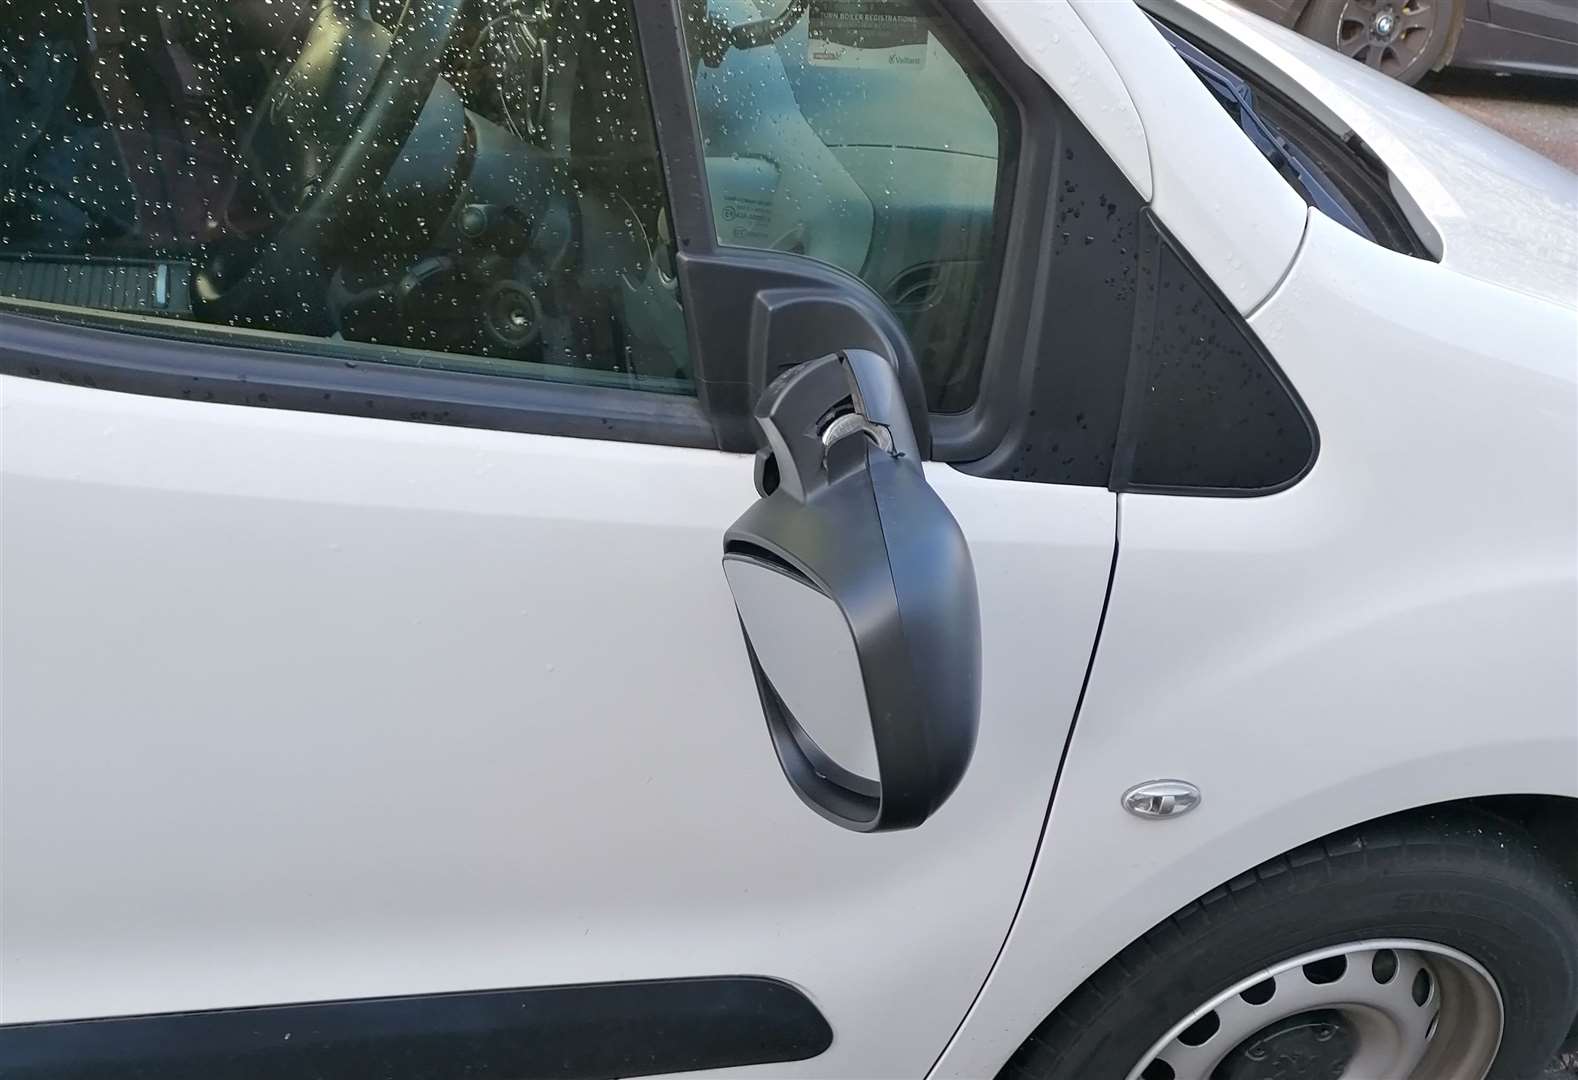 Wing mirrors on cars were broken